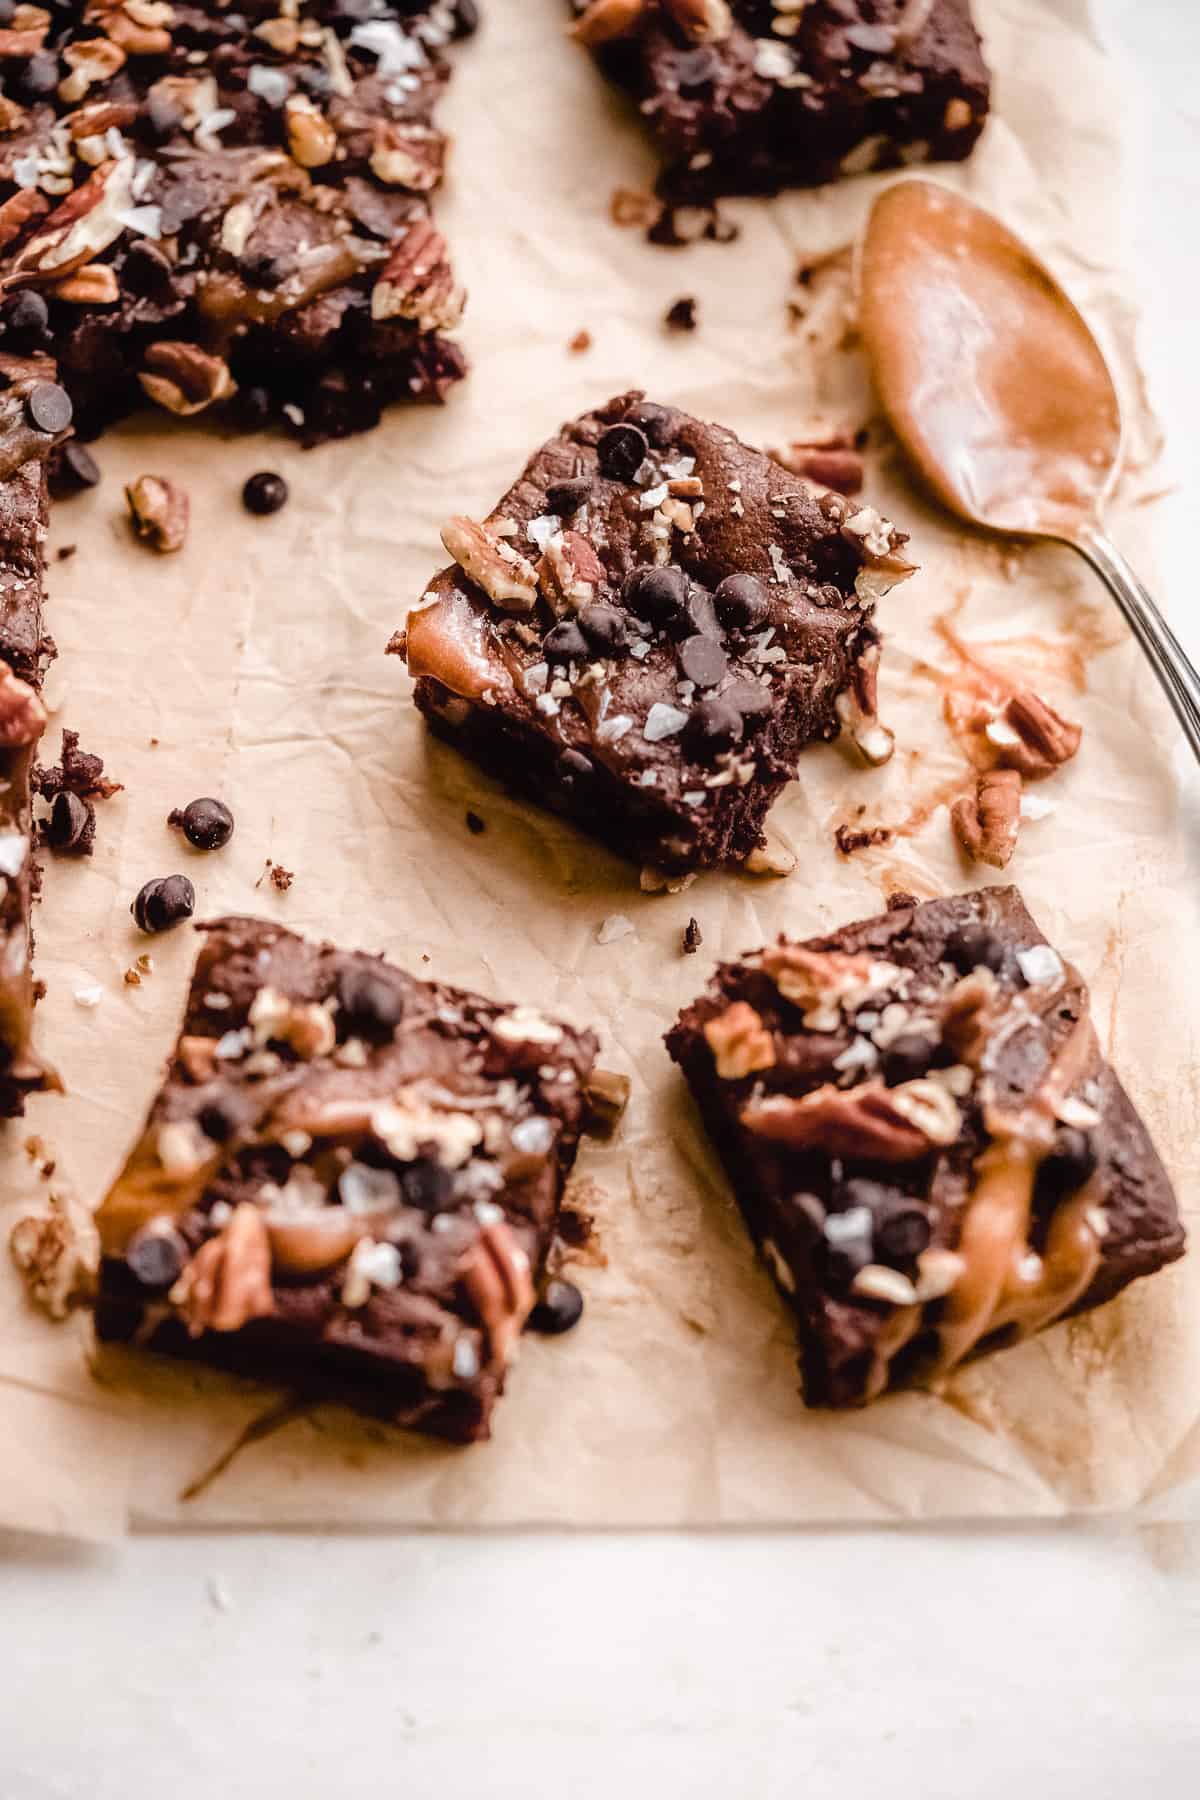 Brownie squares on brown paper topped with nuts and caramel sauce.